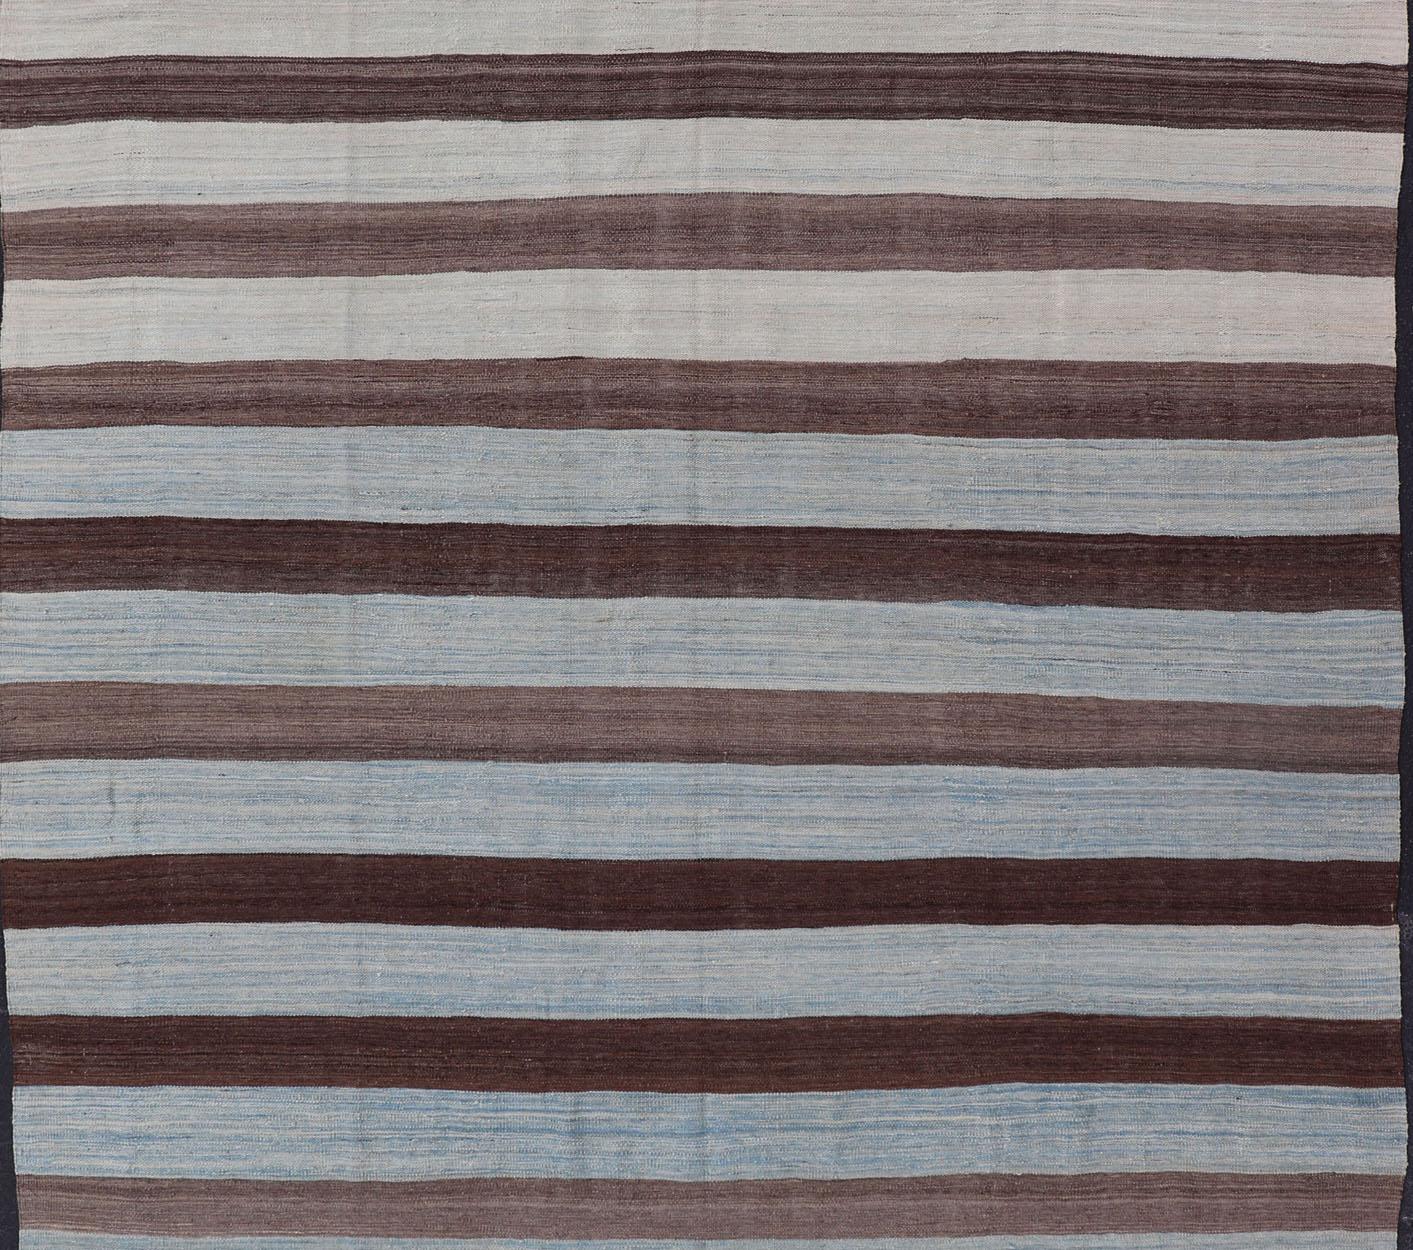 Afghan Modern Kilim Hand Woven Casual Rug with Stripes in Shades of Blue and Brown For Sale